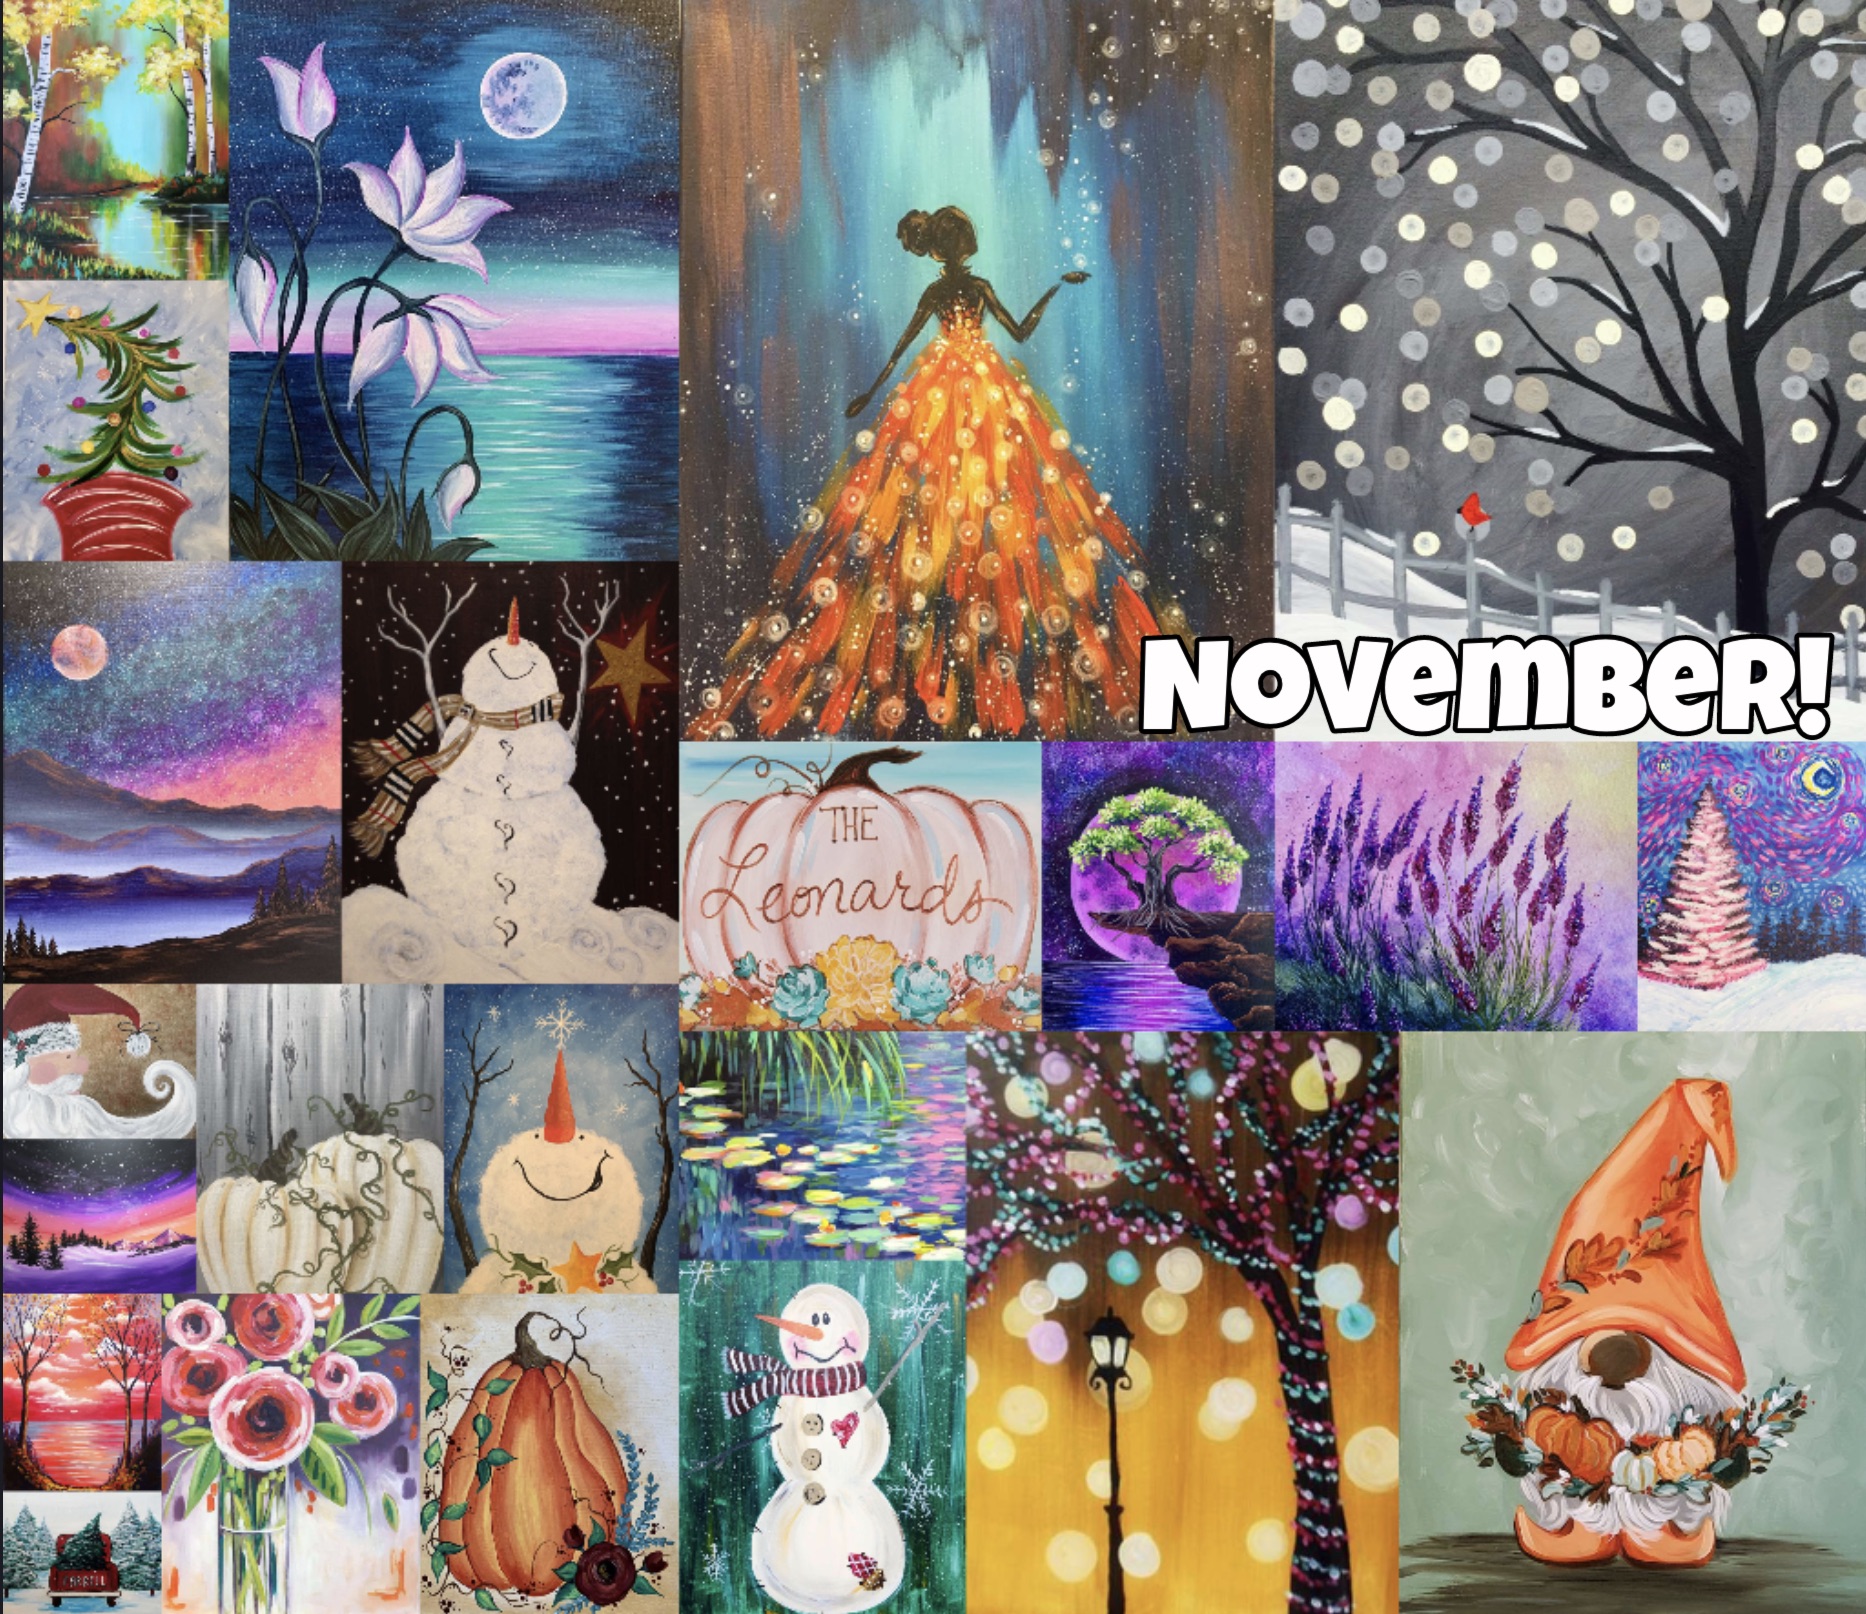 Come paint with us in November!